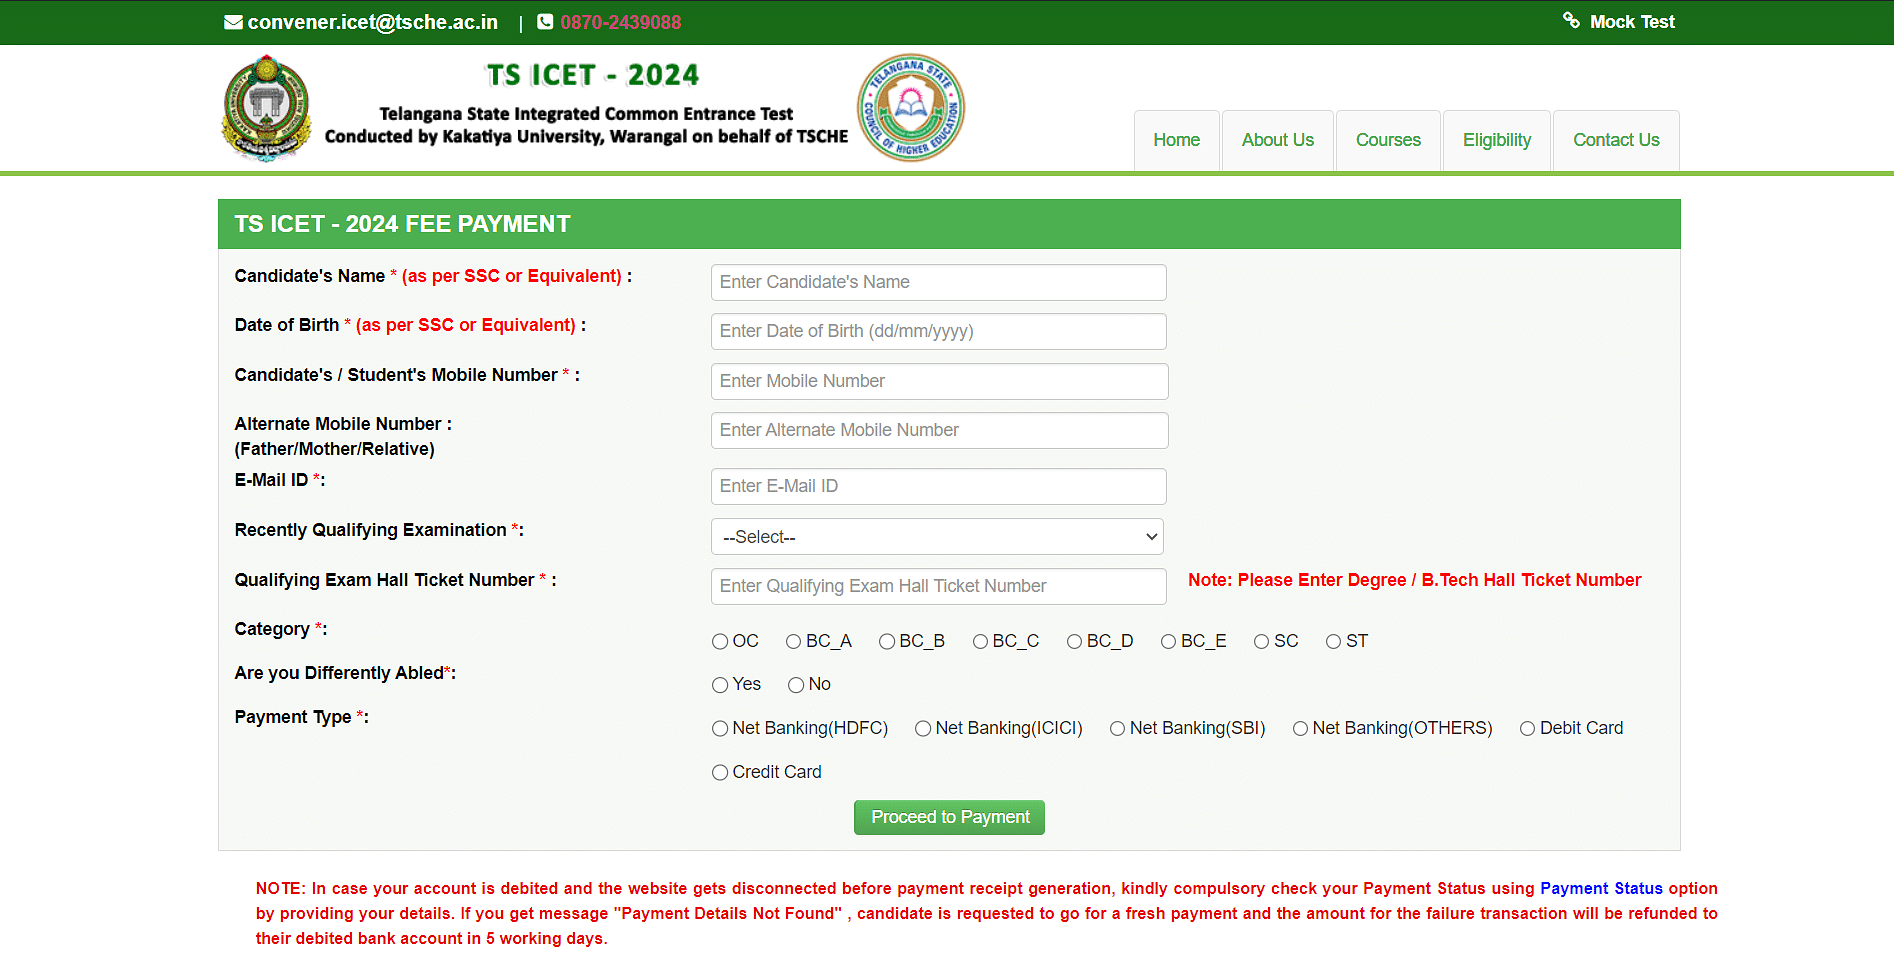 TS ICET Application Fee Payment 2024